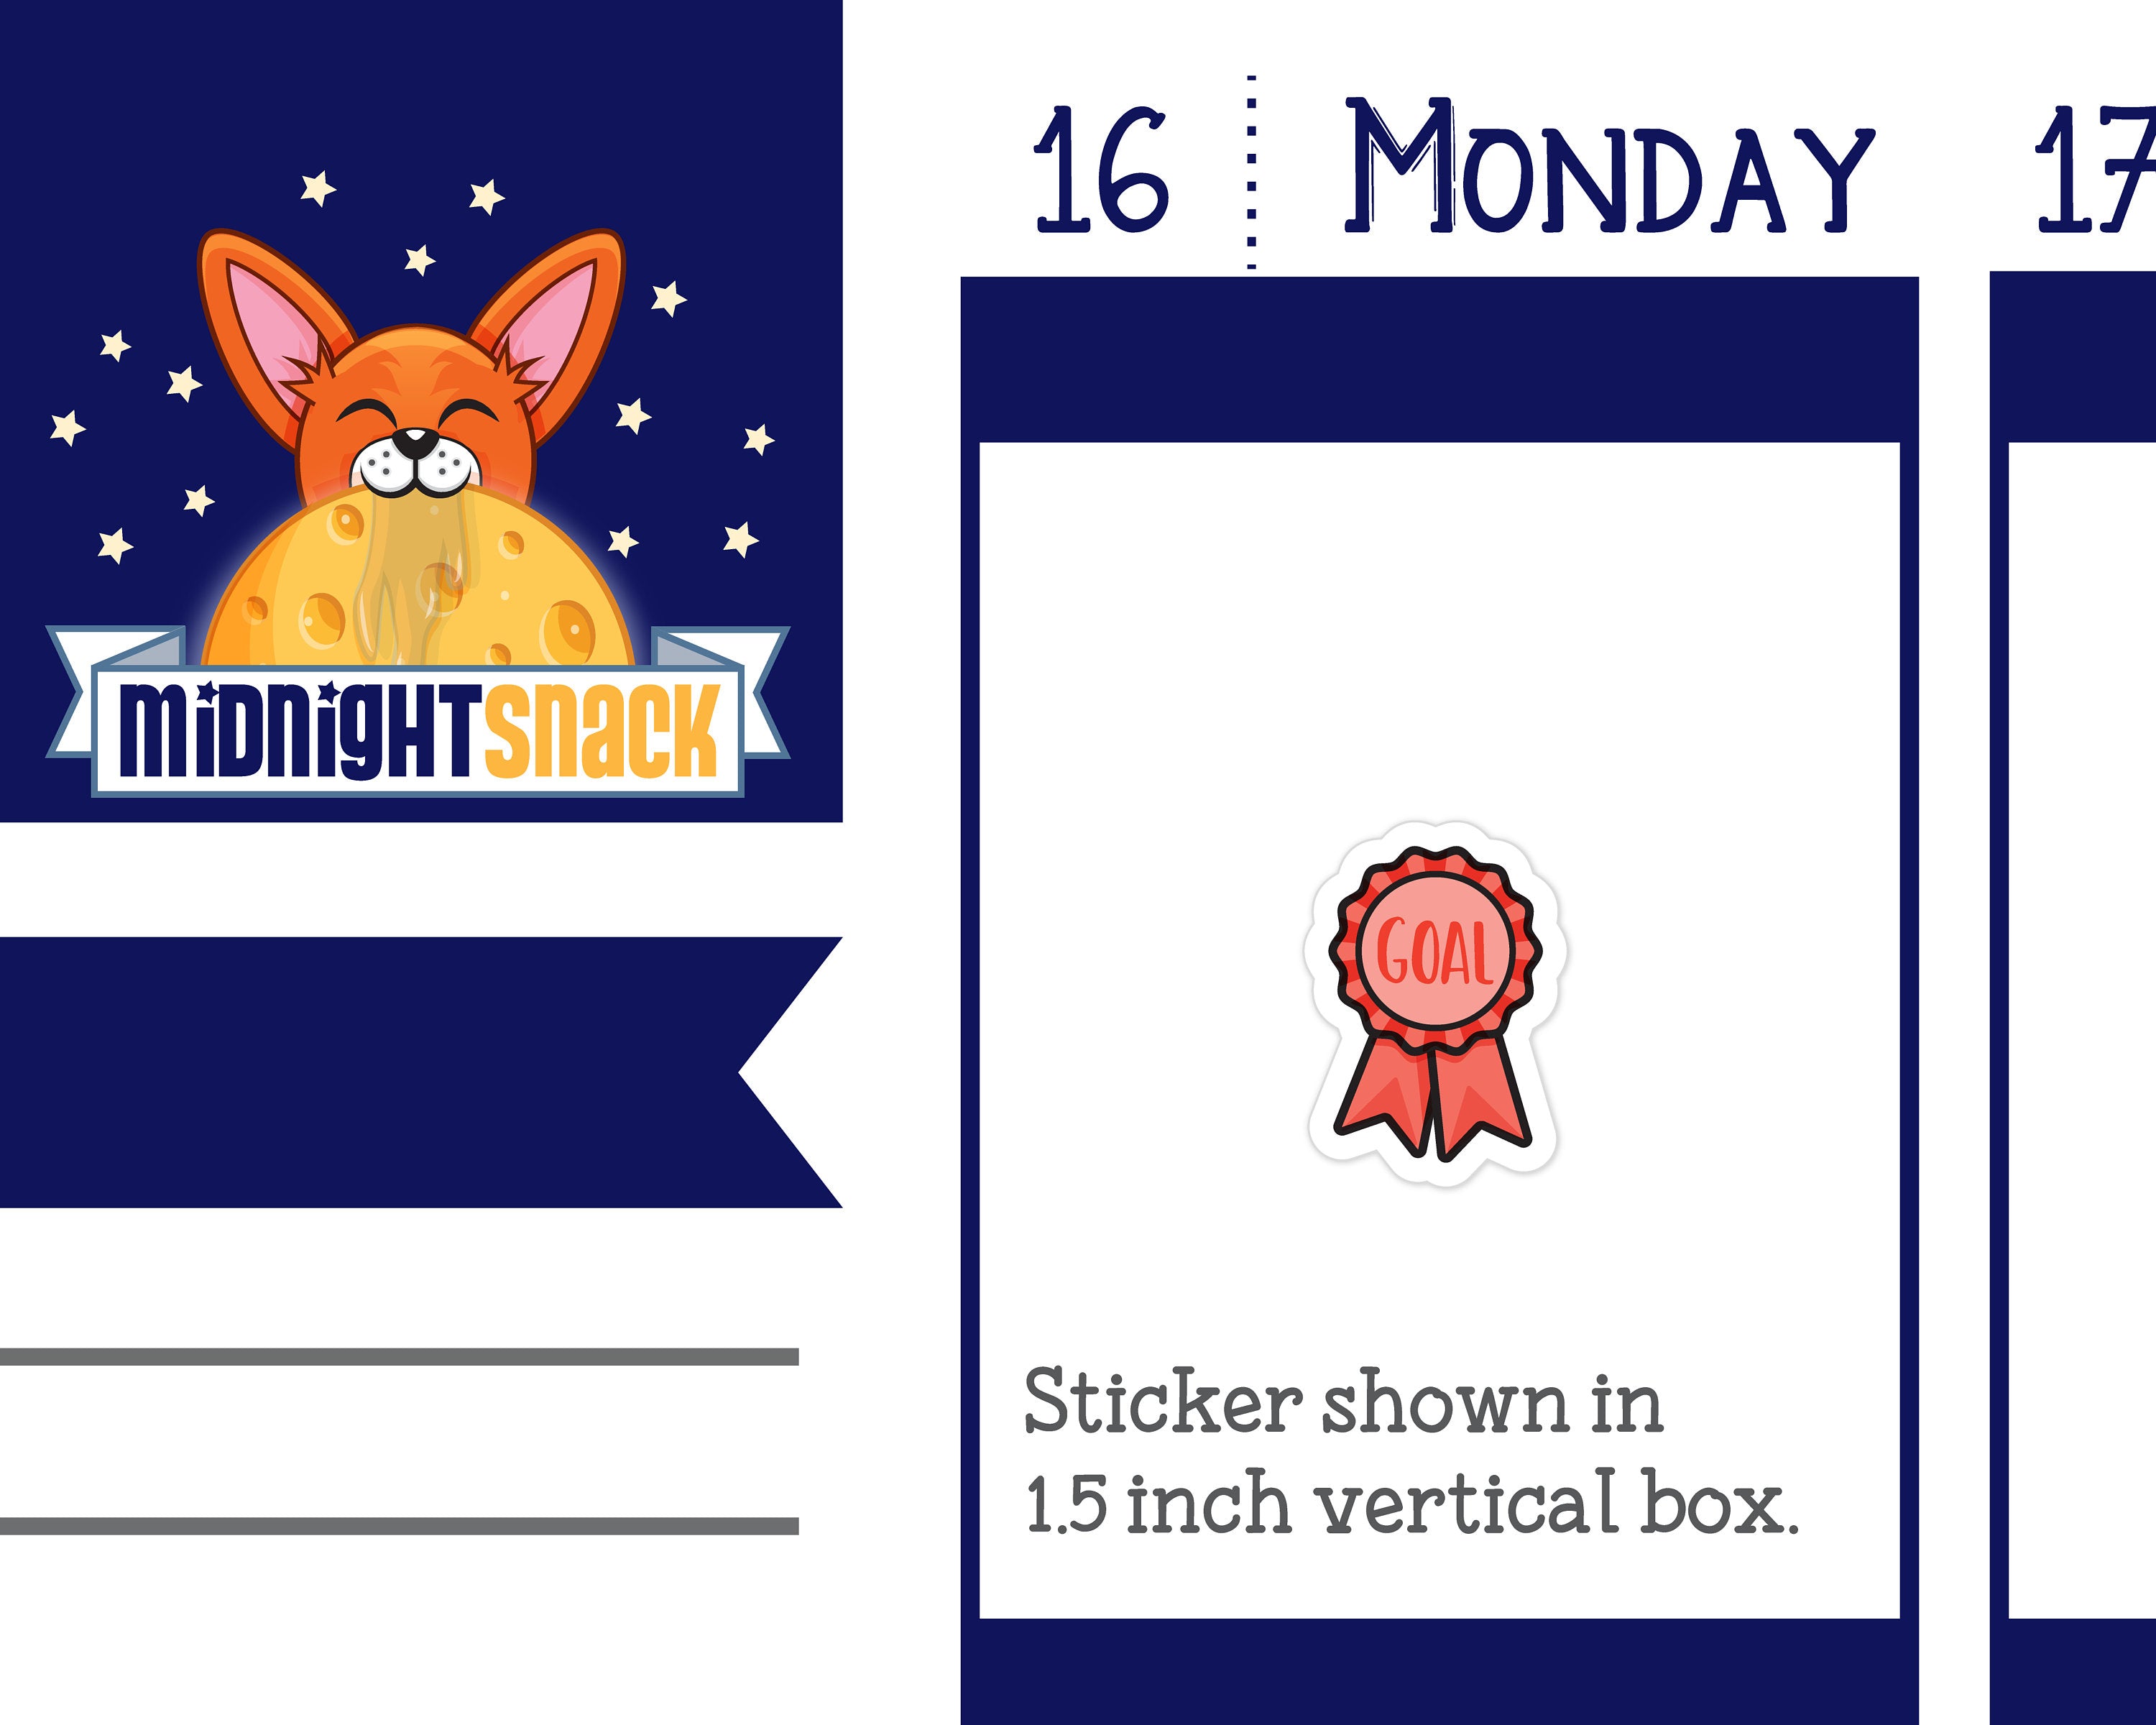 Goal Award Ribbon Icon: Small Win Planner Stickers Midnight Snack Planner